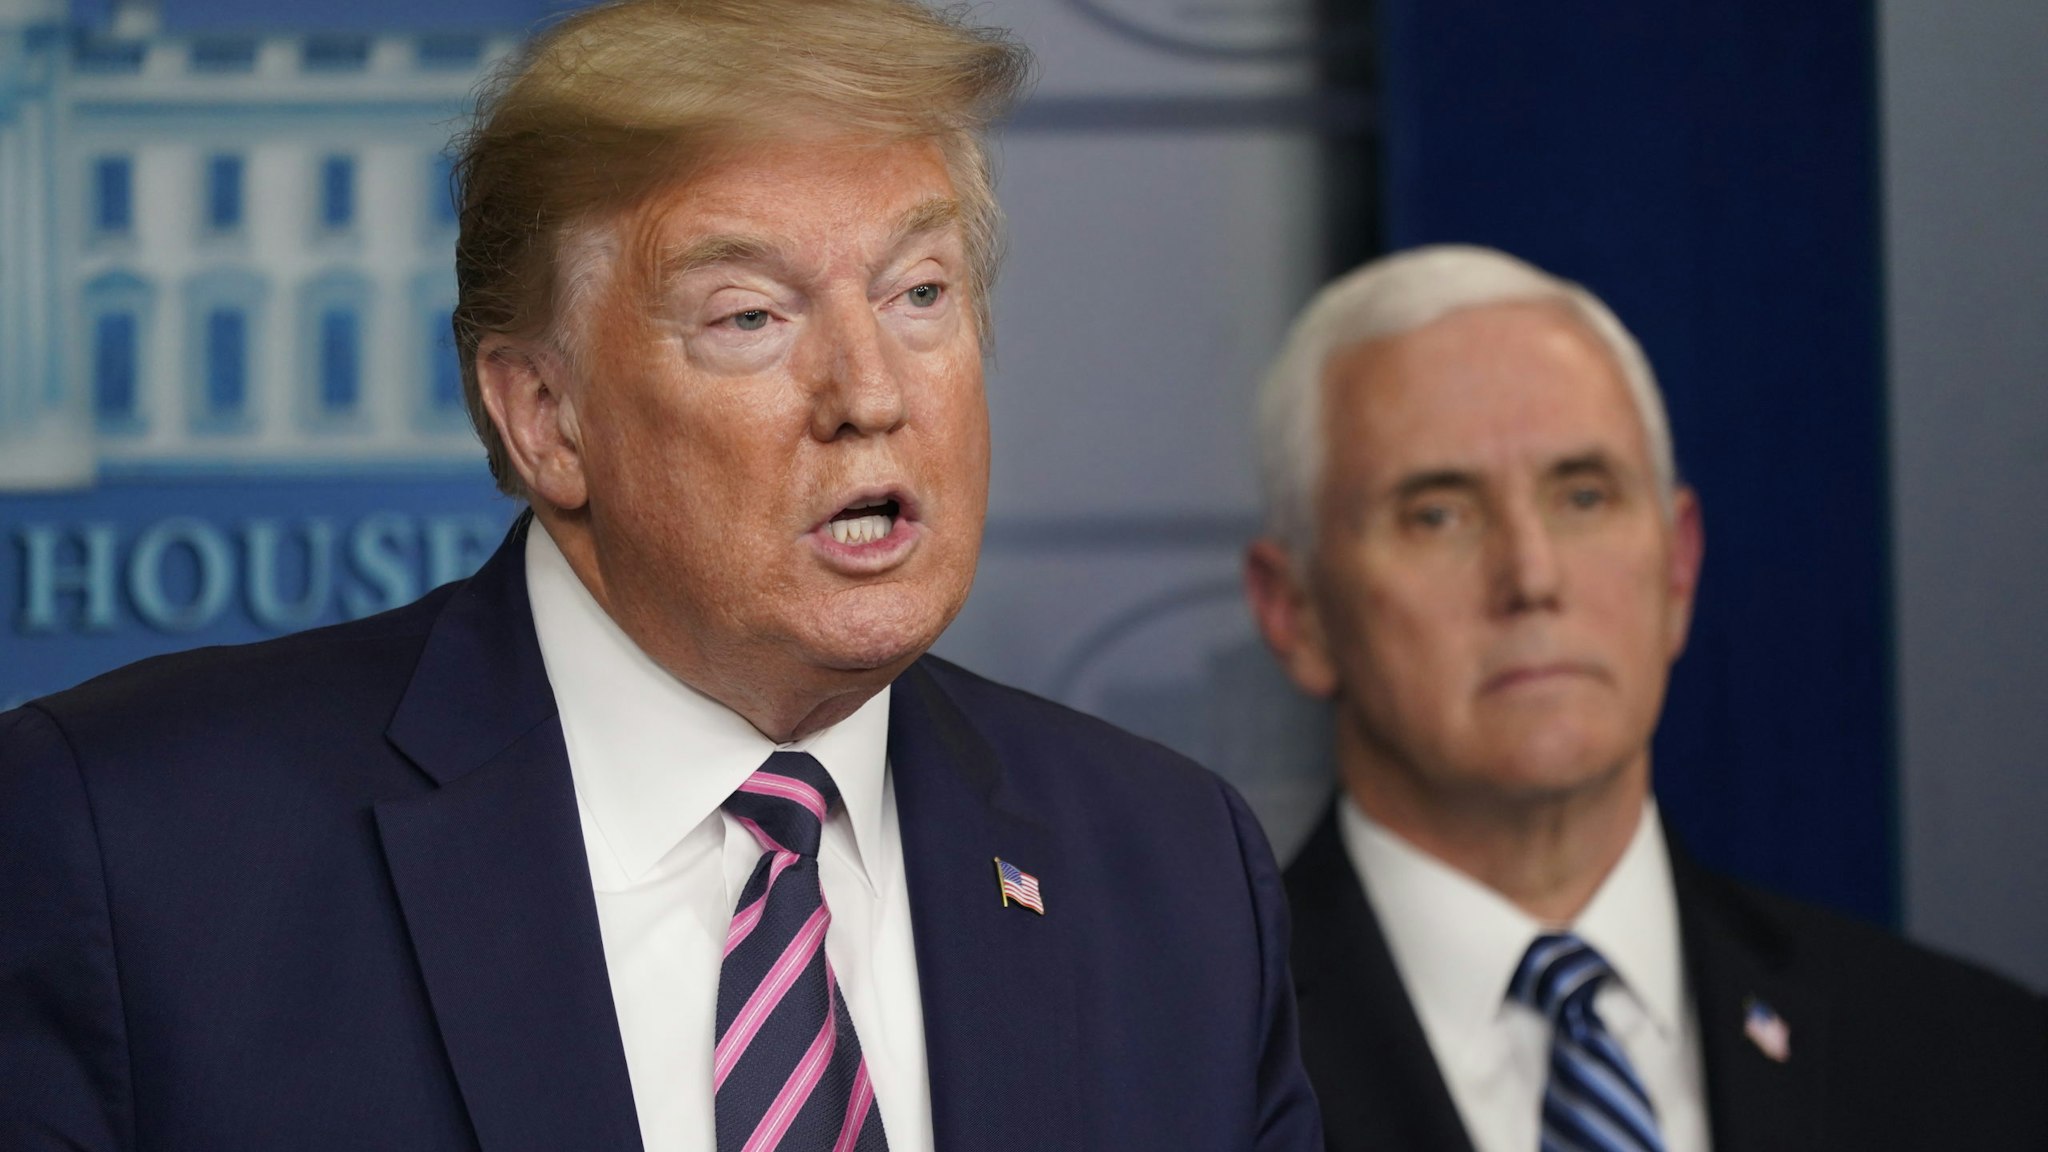 U.S. President Donald Trump speaks as Vice President Mike Pence listens during a news conference in the White House in Washington, D.C., U.S., on Friday, April 24, 2020. Trump has been determined to talk his way through the coronavirus crisis, but his frequent misstatements at his daily news conferences have caused a litany of public health and political headaches for the White House. Photographer: Chris Kleponis/Polaris/Bloomberg via Getty Images